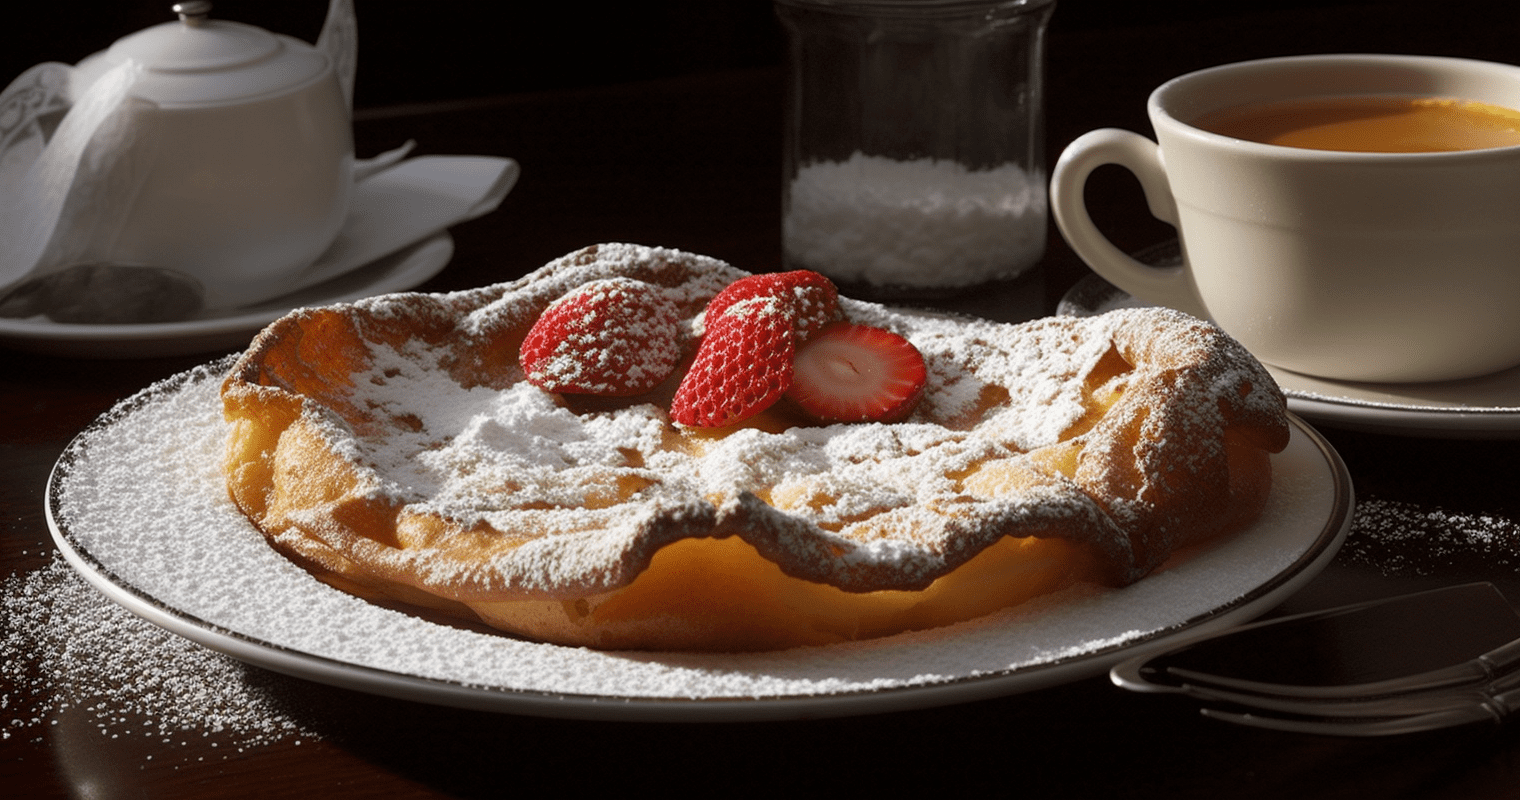 German Pancakes: A Fluffy Morning Delight